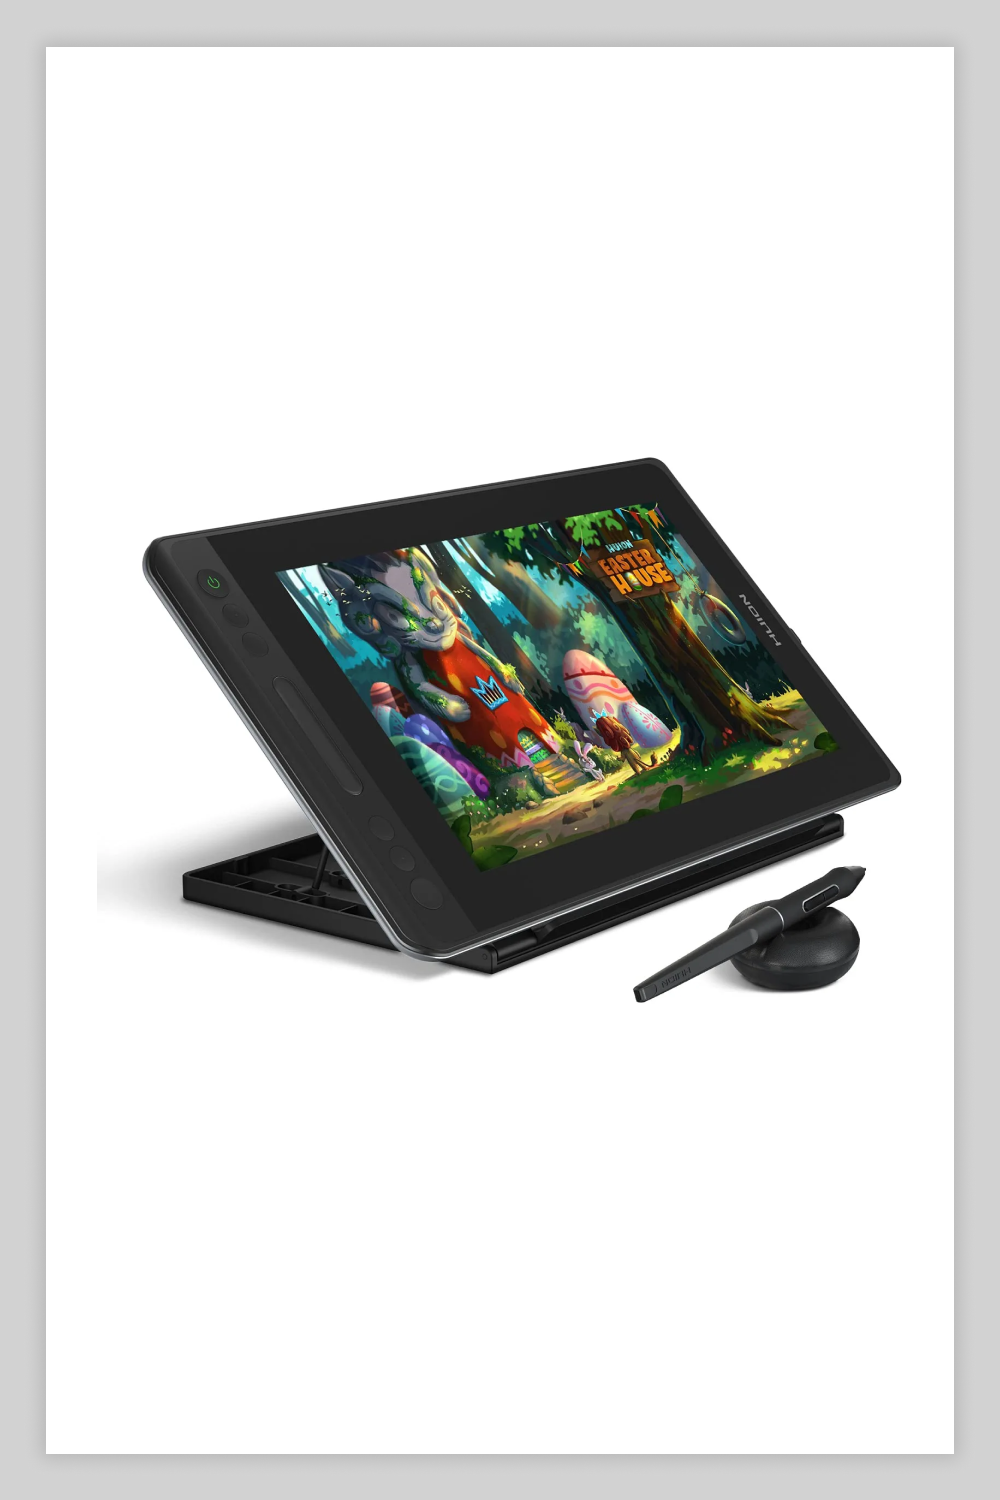 HUION KAMVAS Pro 13 Graphics Drawing Monitor with Stand.